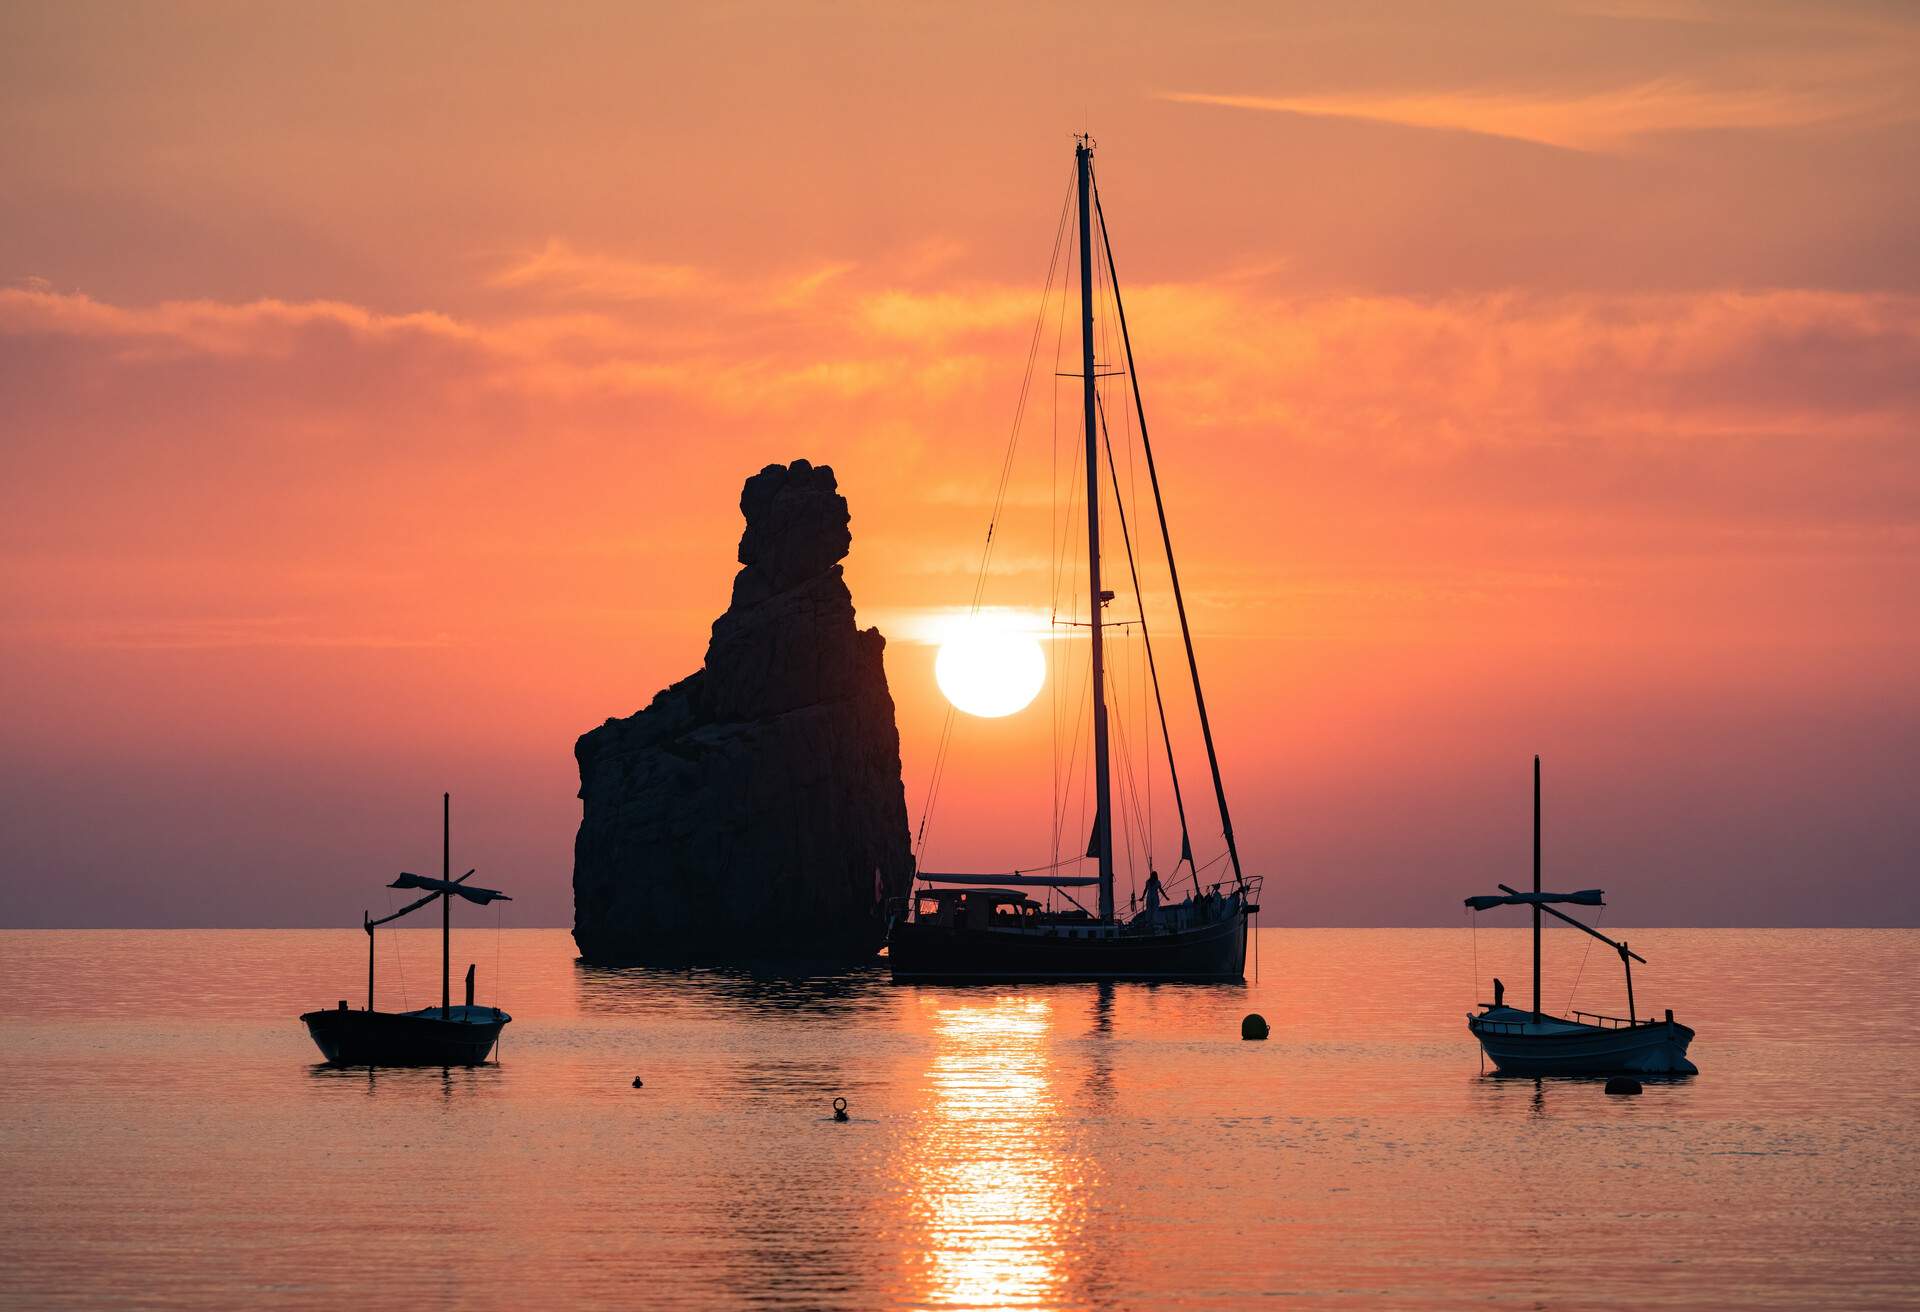 A big rock that lies in the middle of the bay, surrounded by anchored boats over the calm water at sunset.